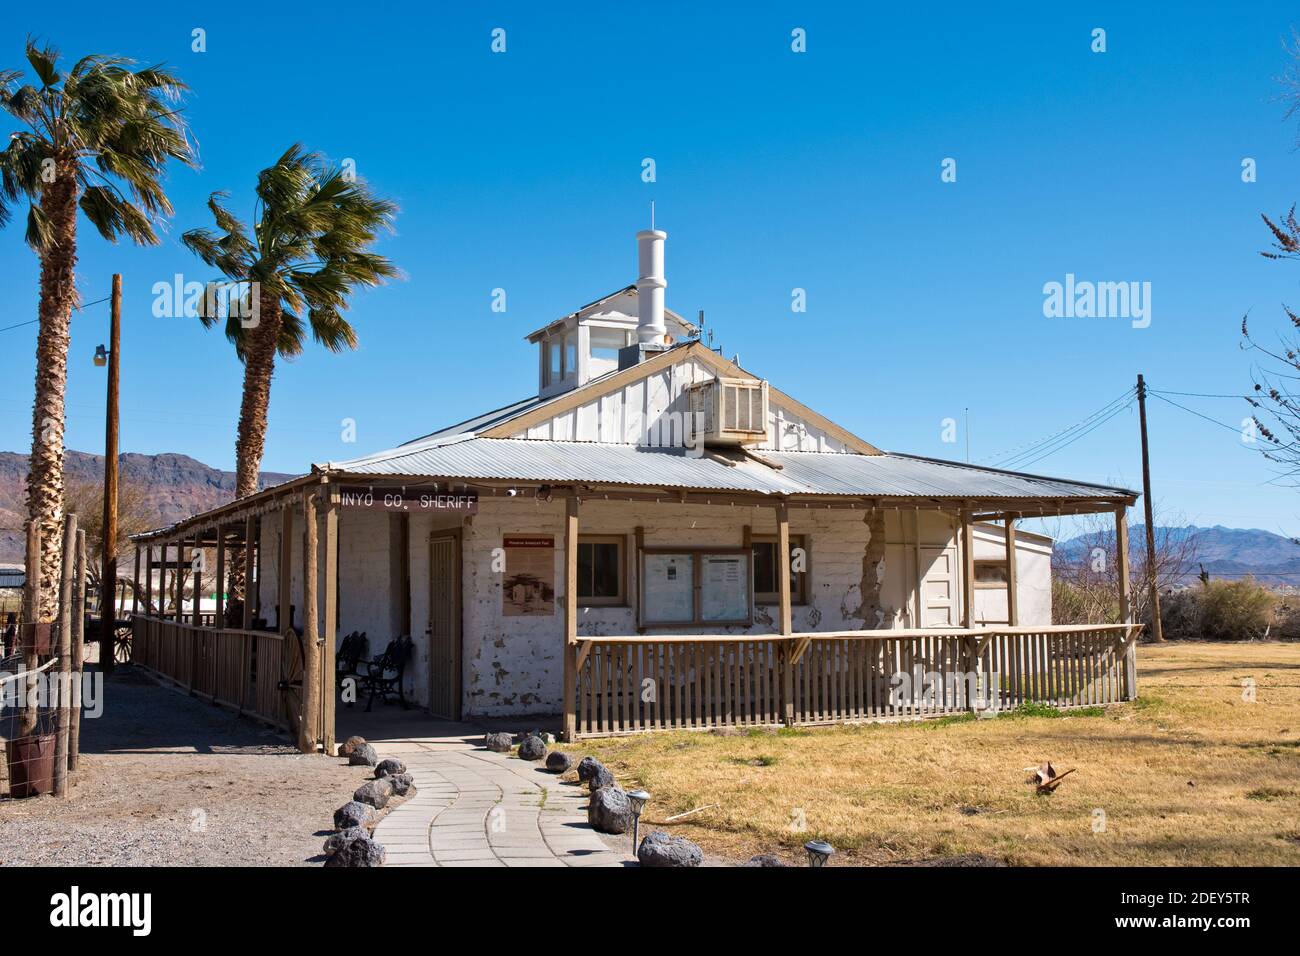 Inyo County Sheriff’s office at Shoshone, a gateway town to Death Valley National Park, California. Stock Photo